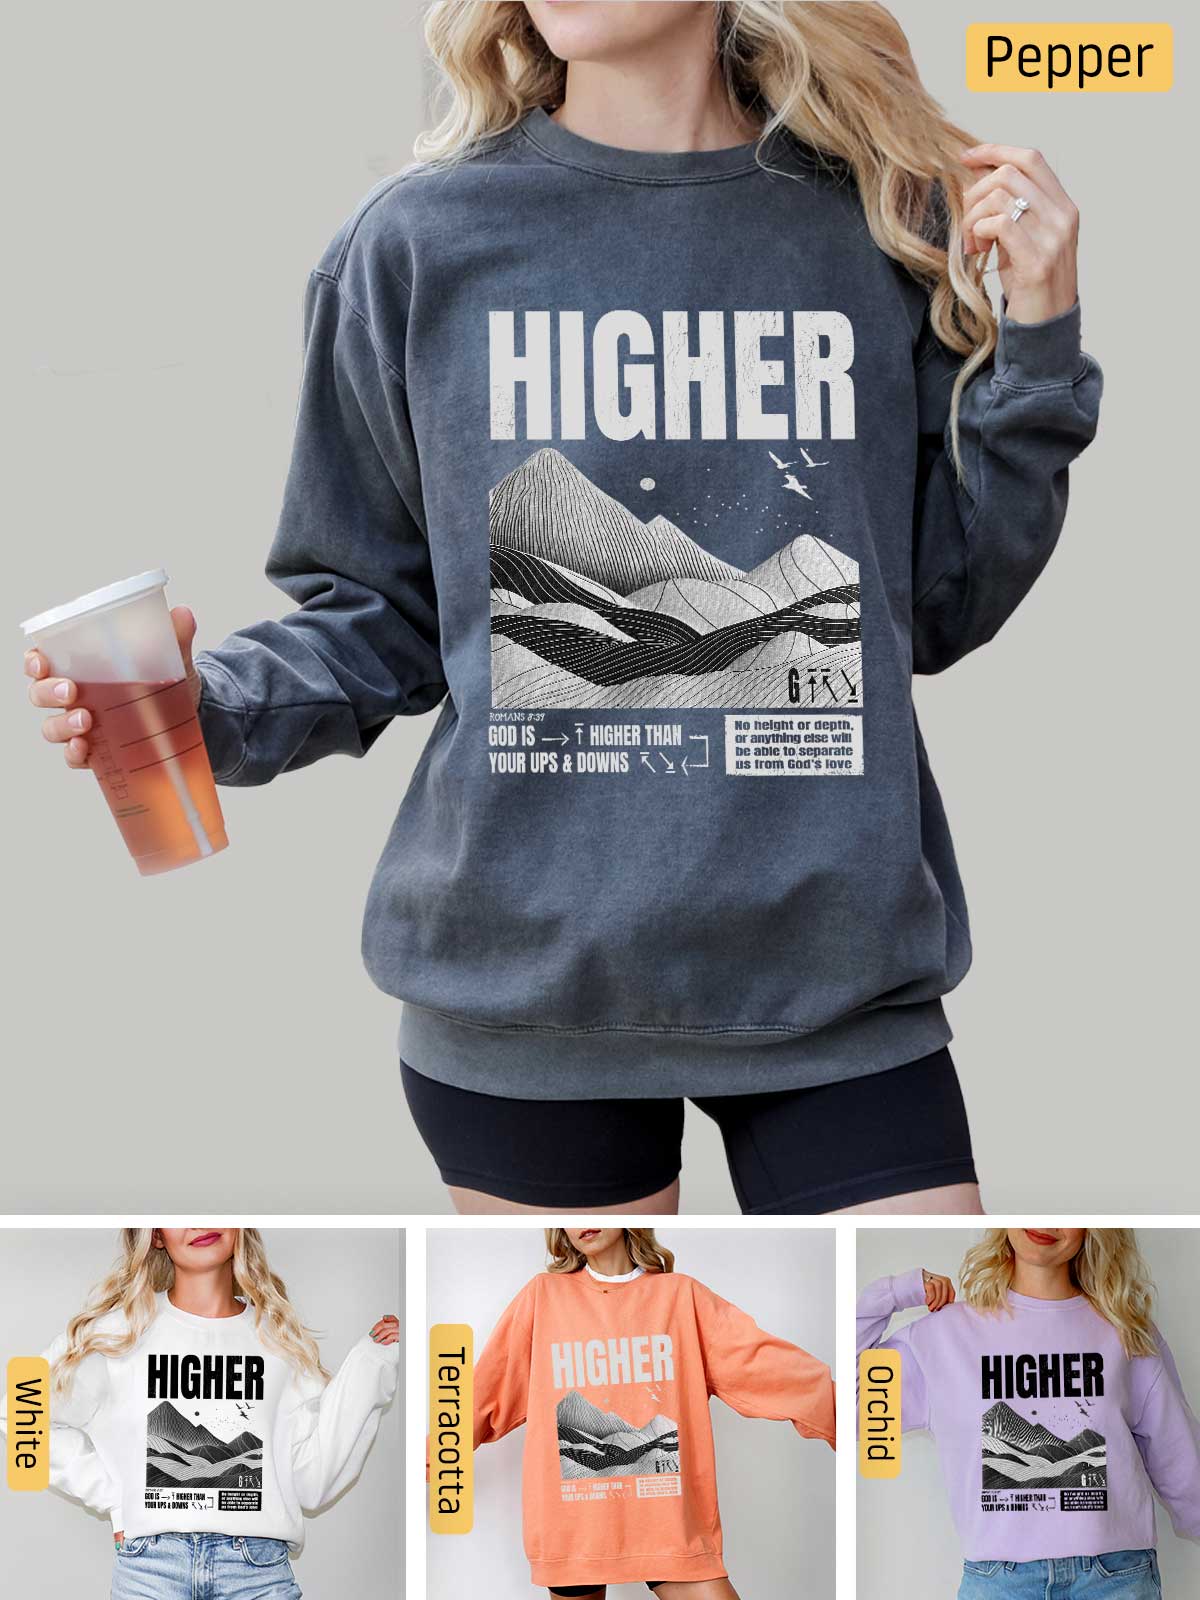 a woman wearing a sweatshirt with the words higher on it